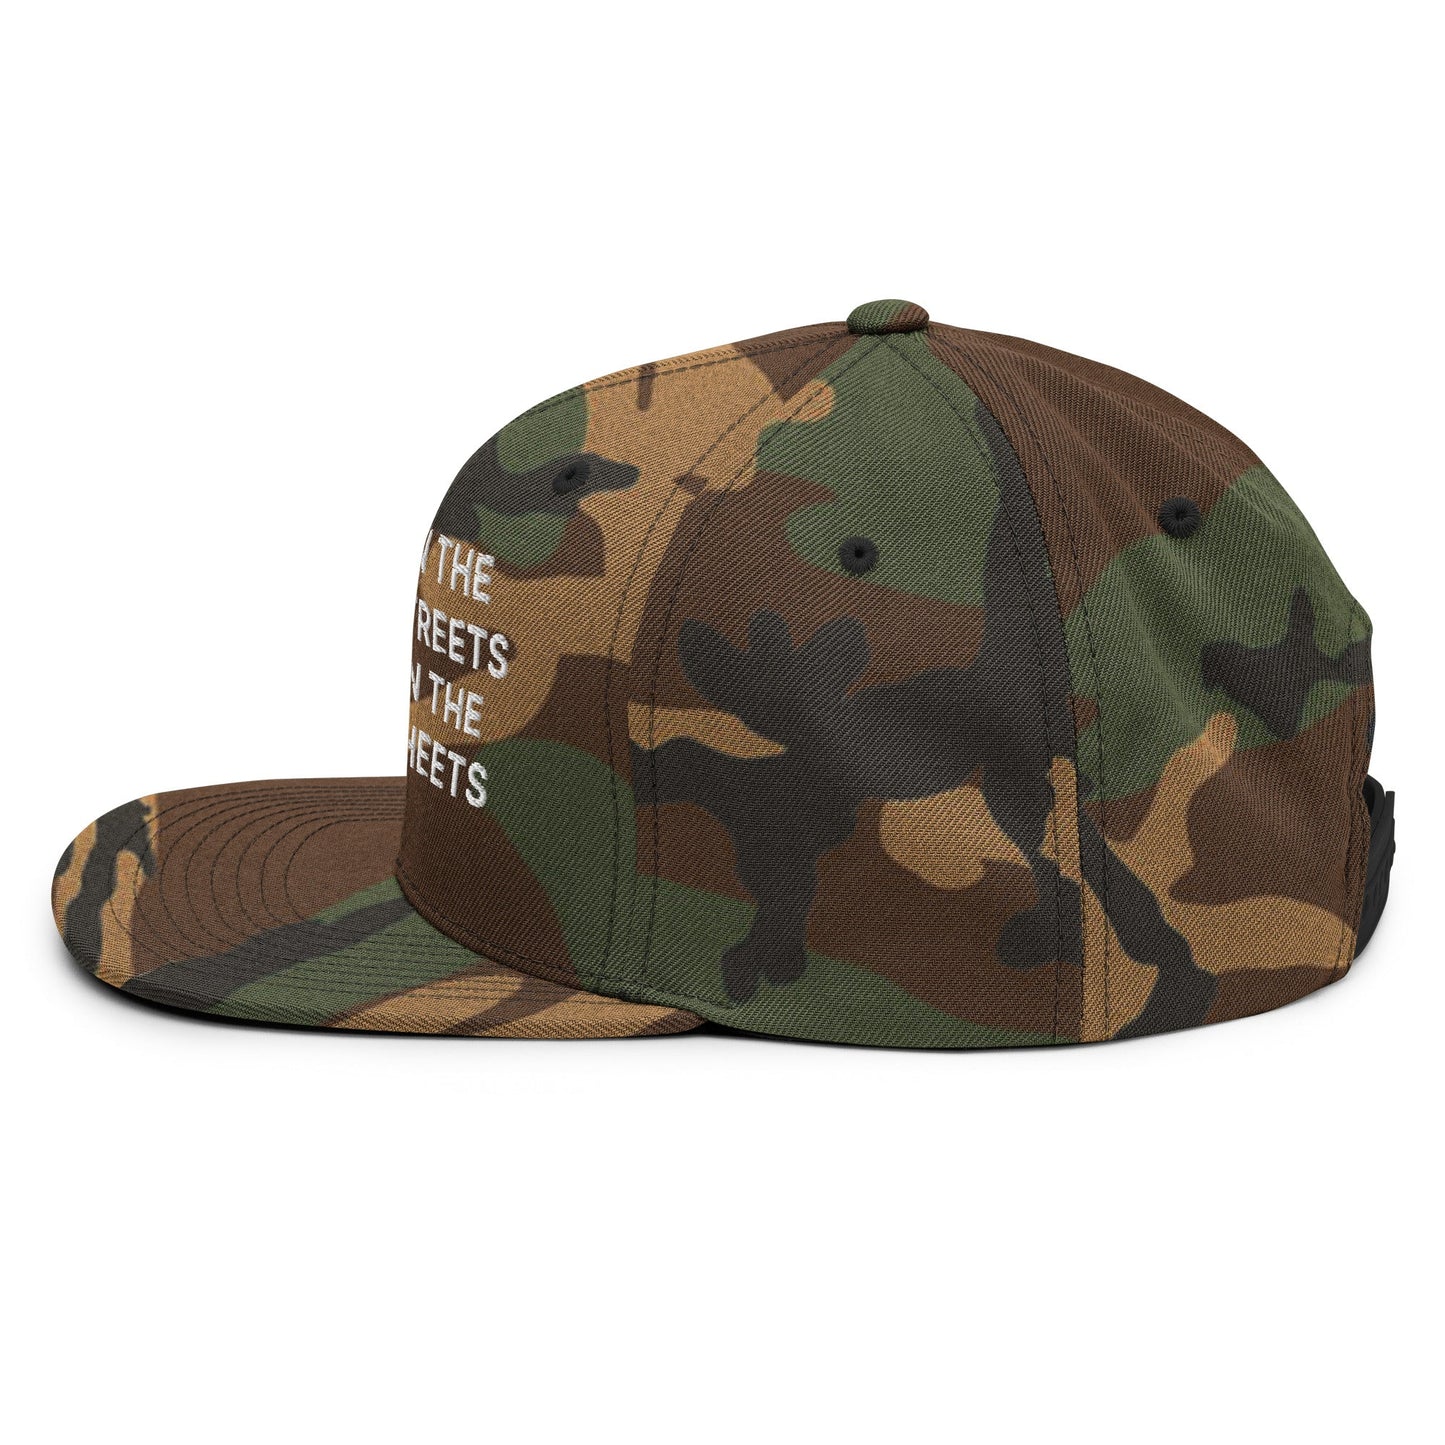 Dad In The Streets Daddy In The Sheets Snapback Hat Green Camo